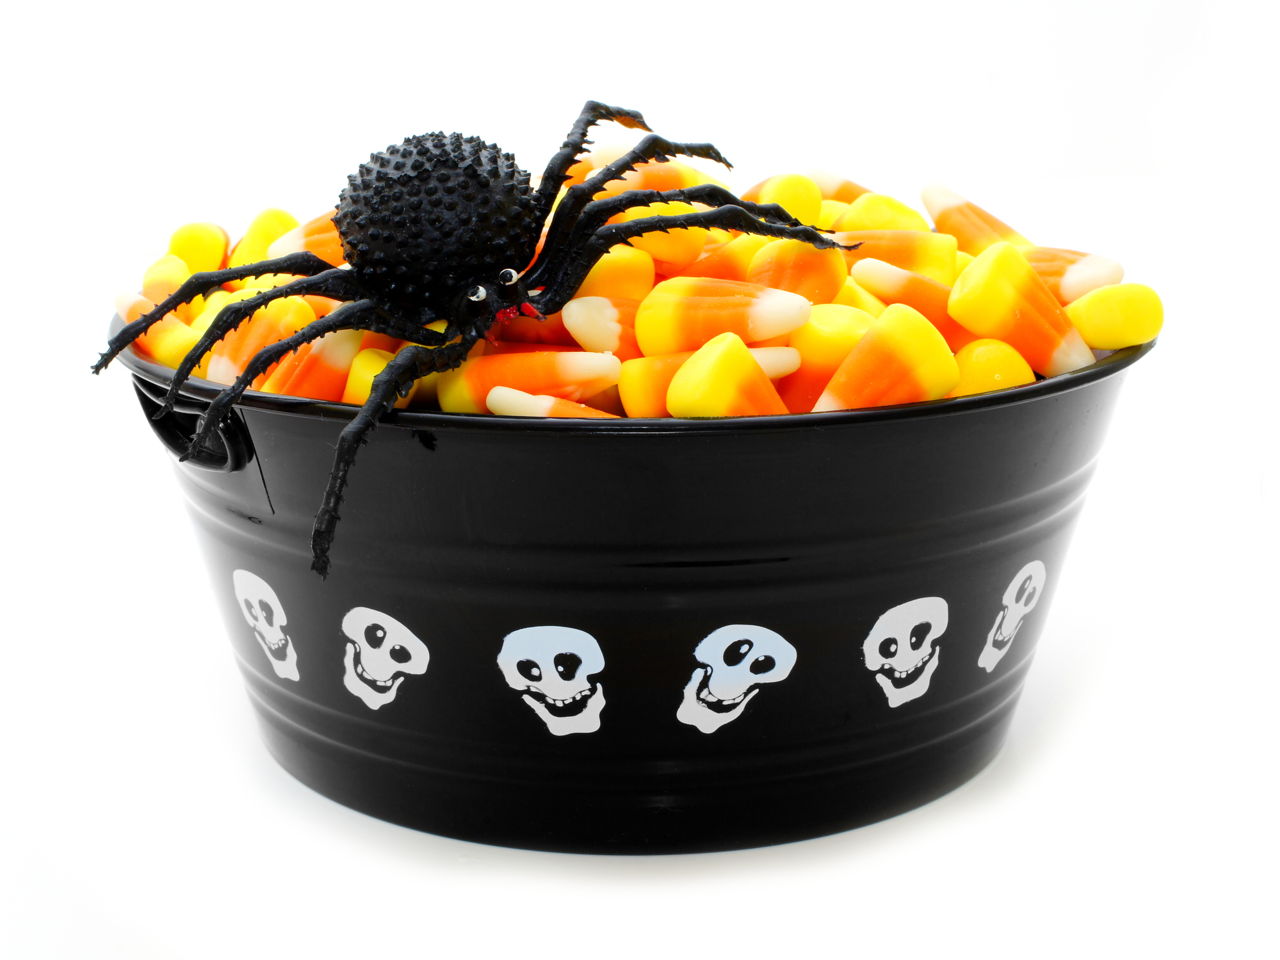 Candy Corn Ingredients